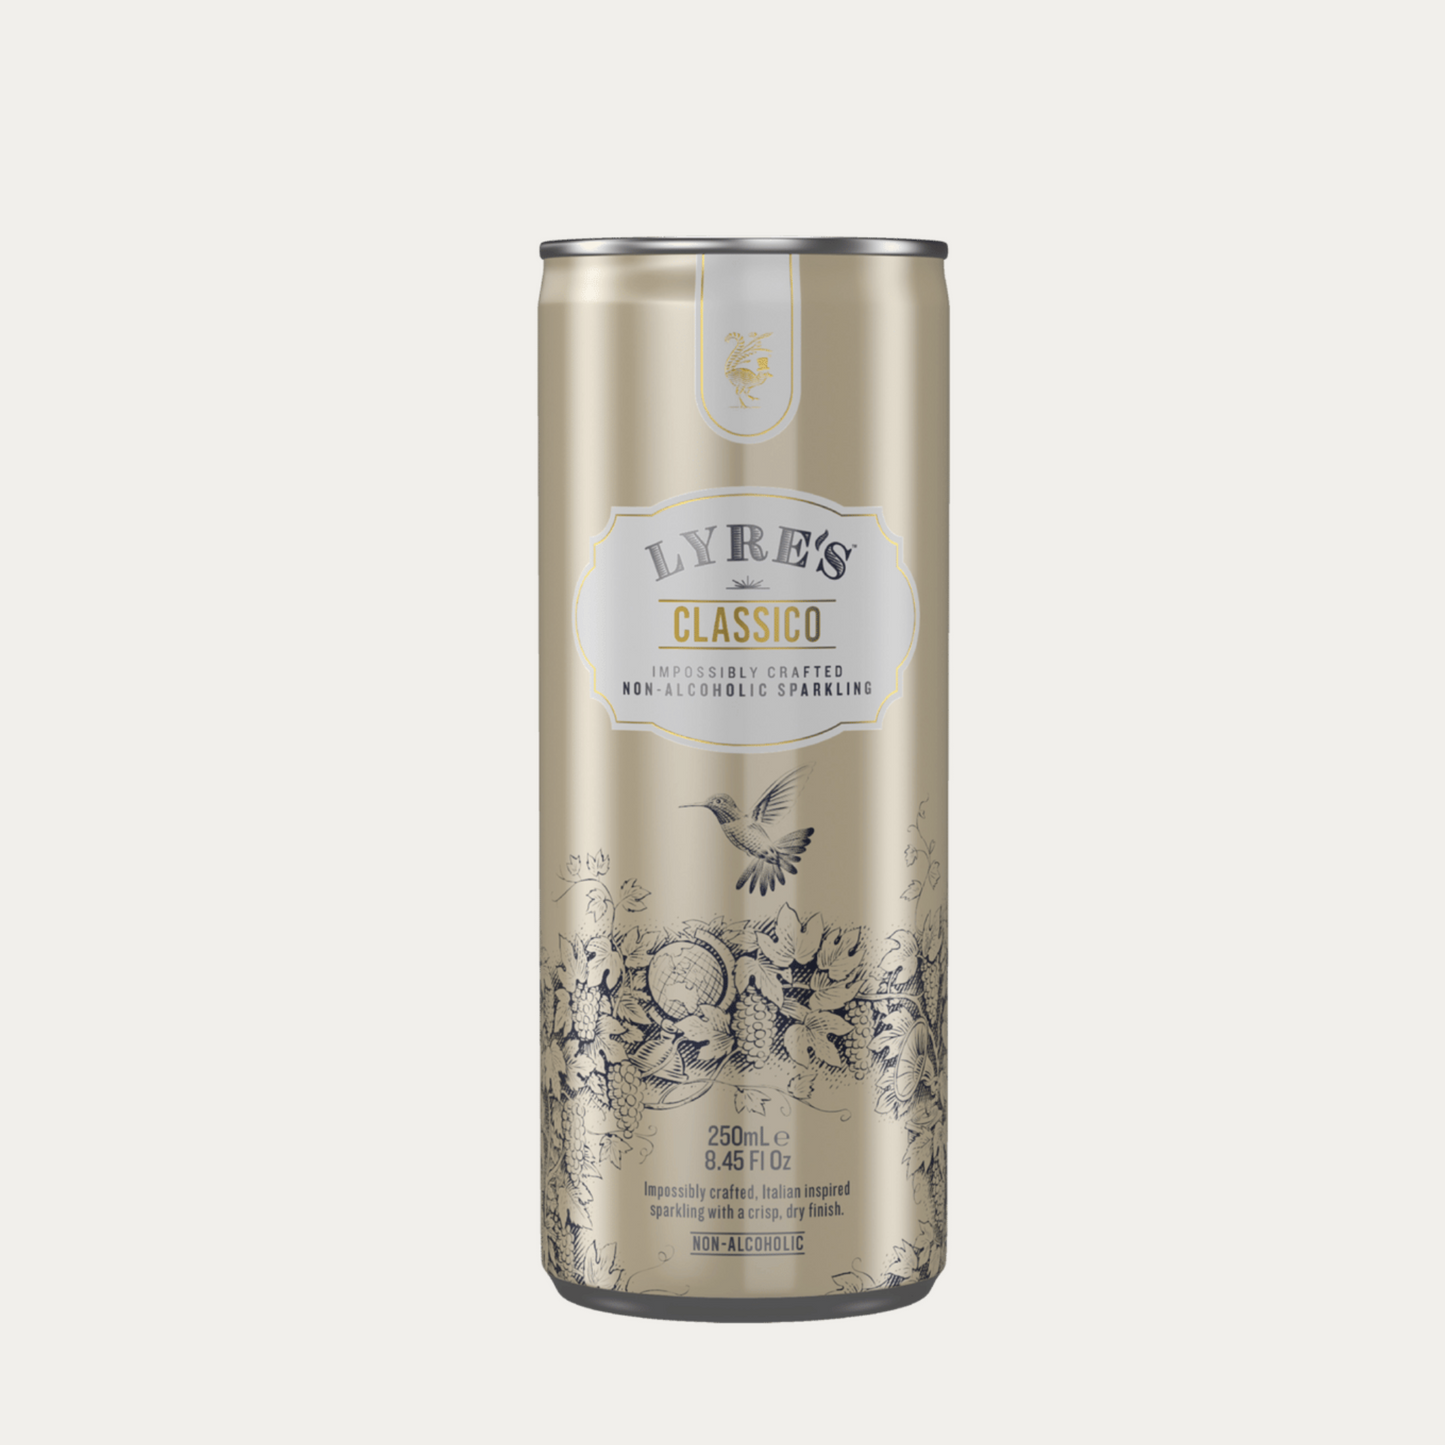 Lyre's Classico (Sparkling in a Can)